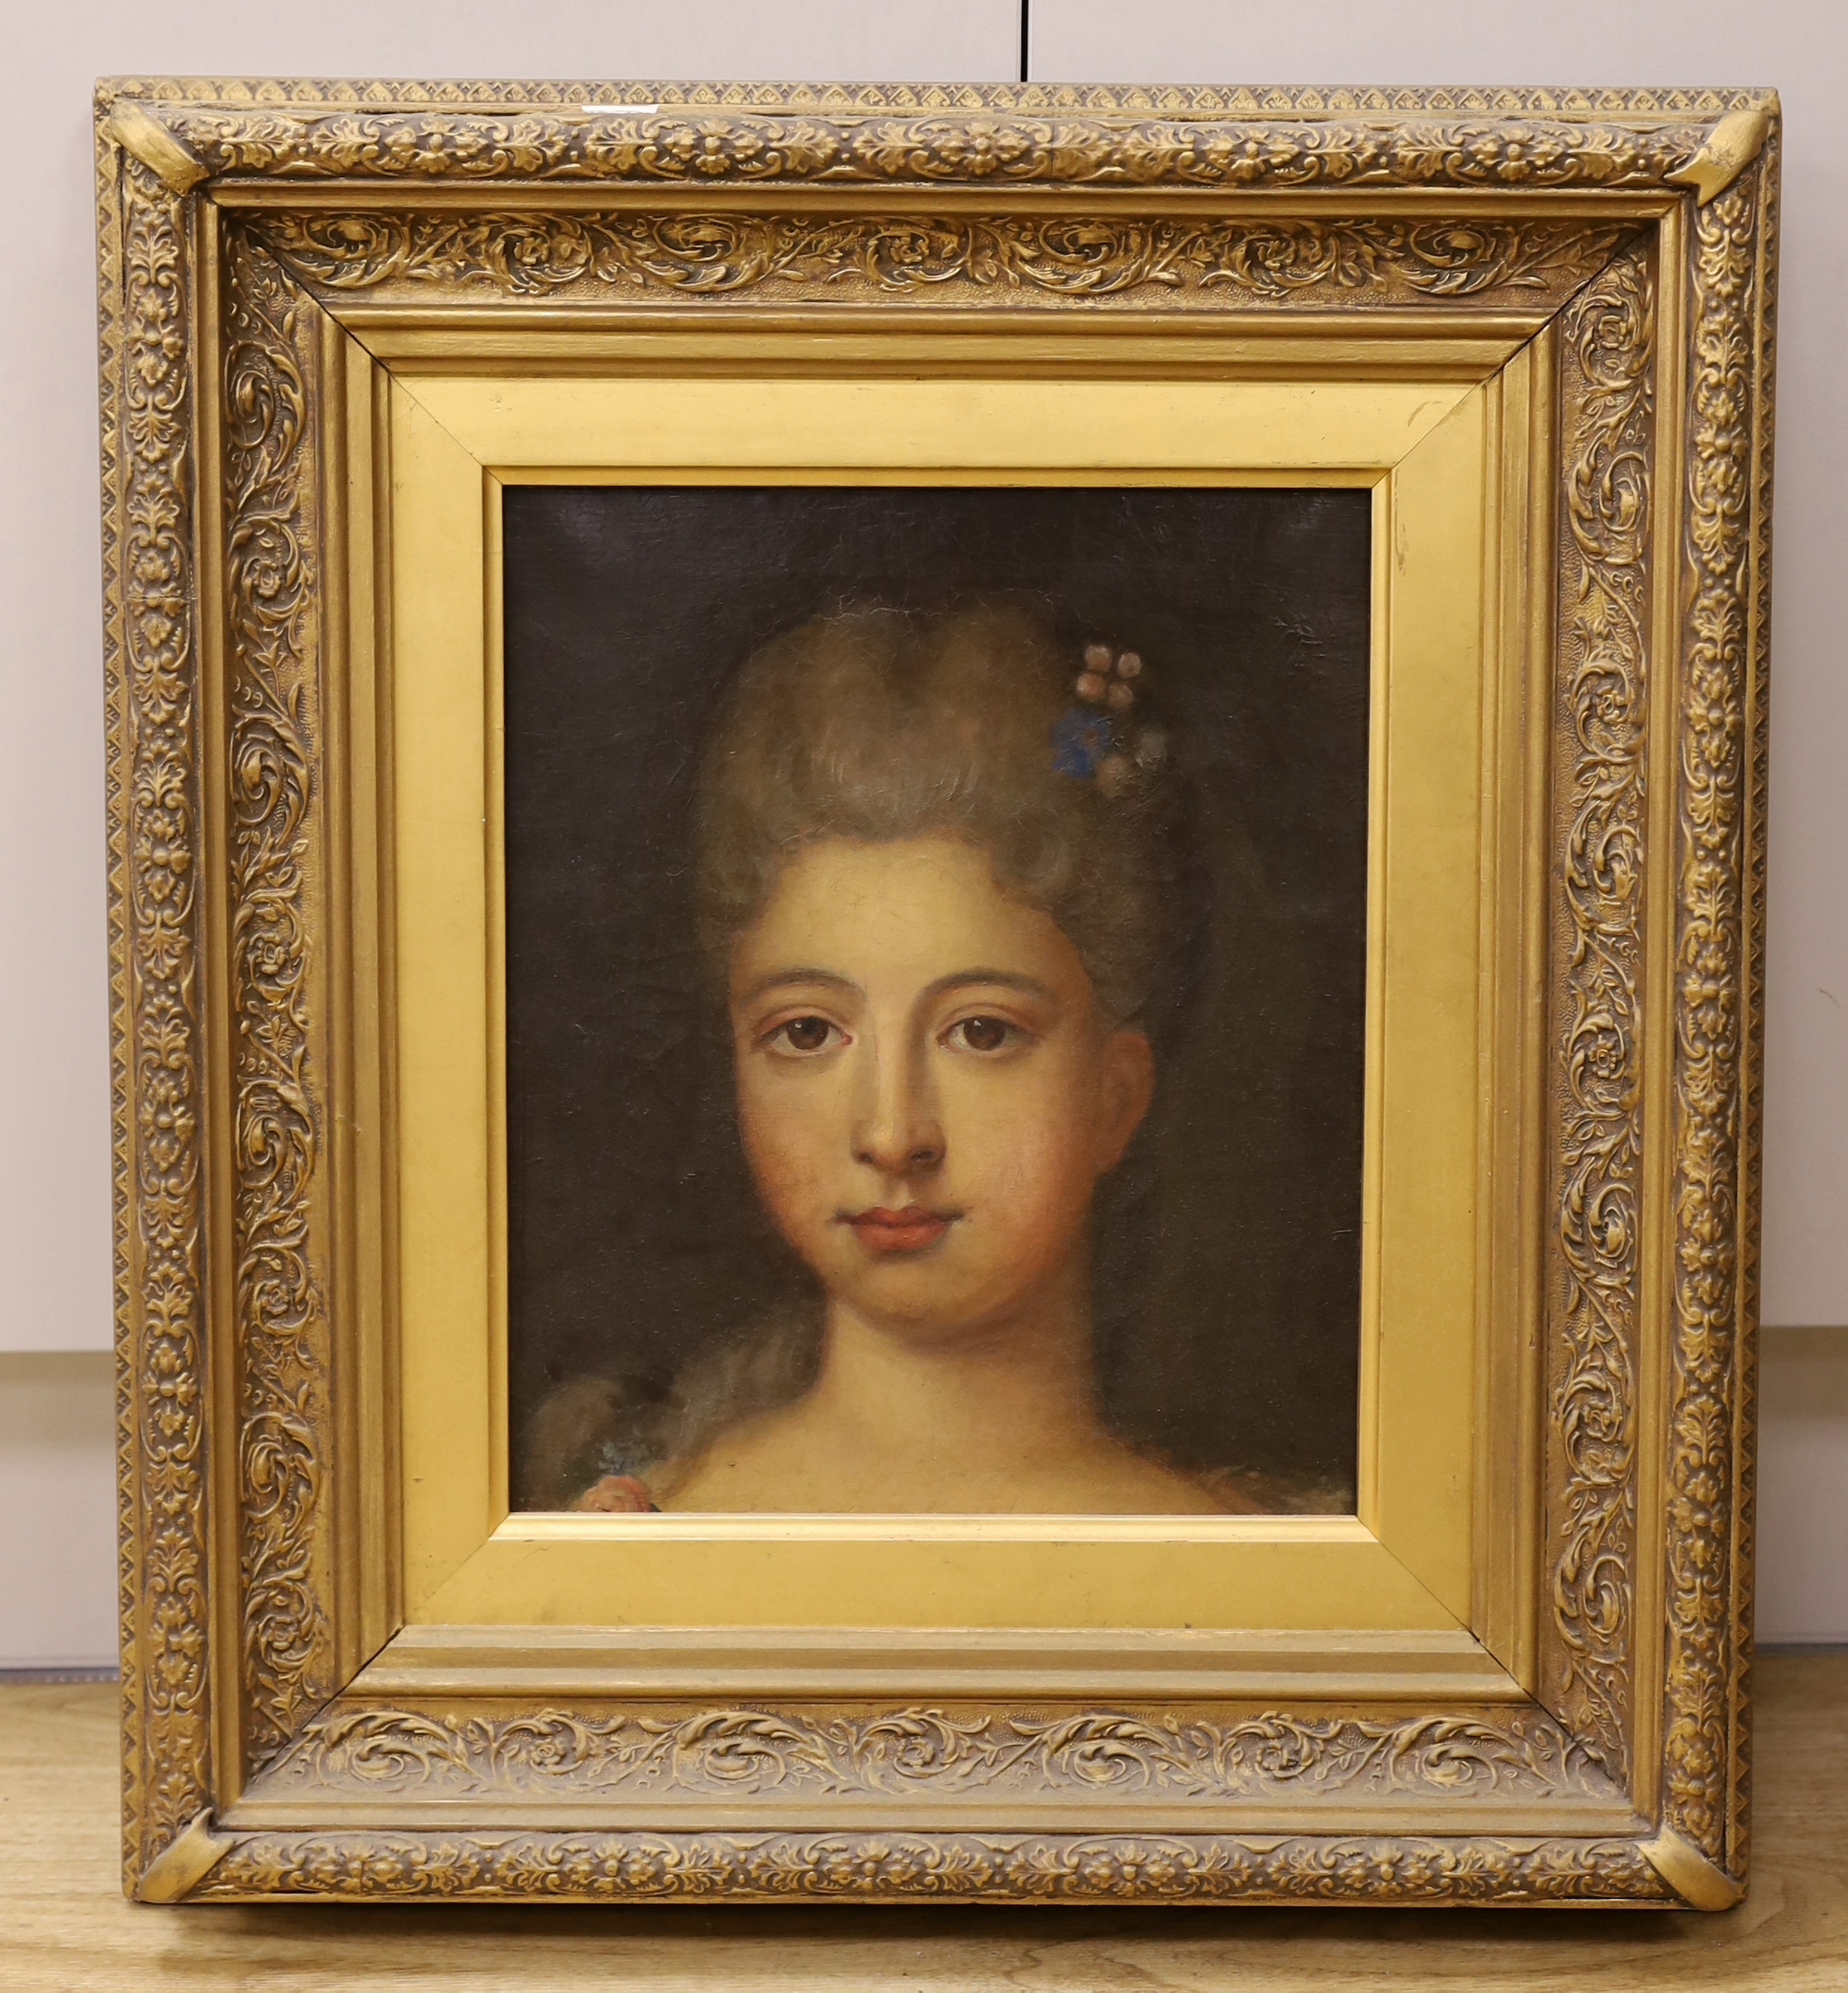 19th century French School, oil on canvas, Portrait of a young lady, canvas makers stamp verso, 33 x 27cm